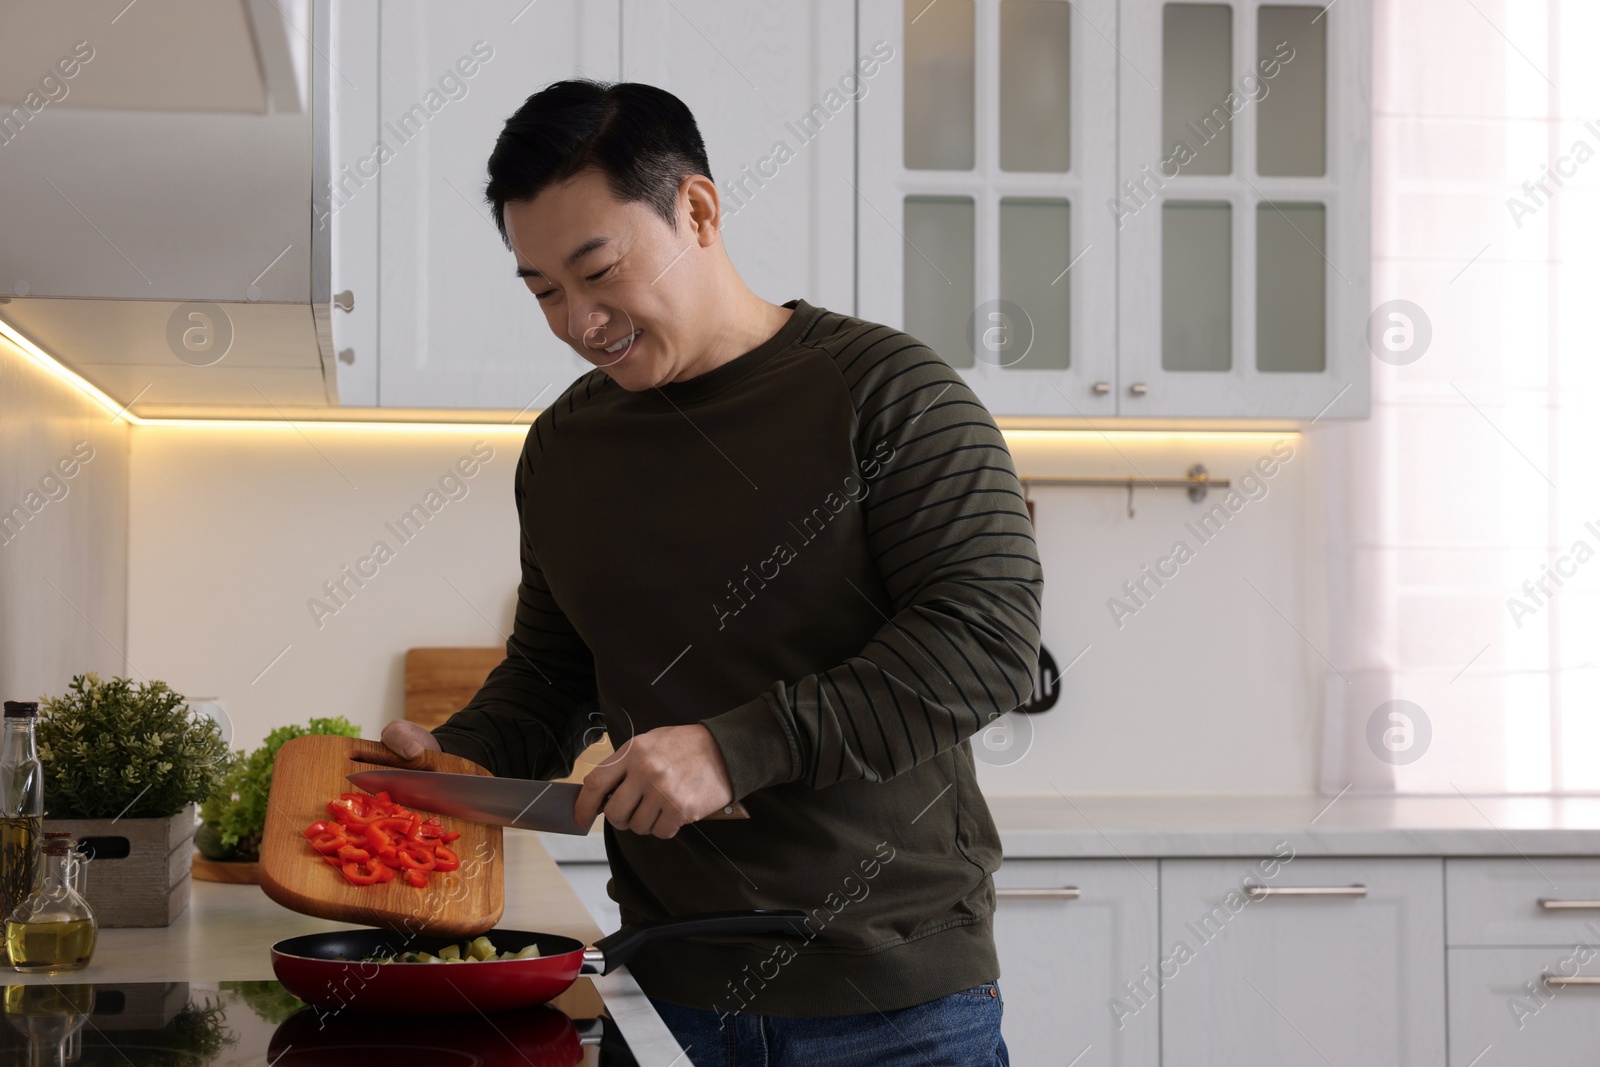 Photo of Cooking process. Man adding cut bell pepper into frying pan in kitchen, space for text